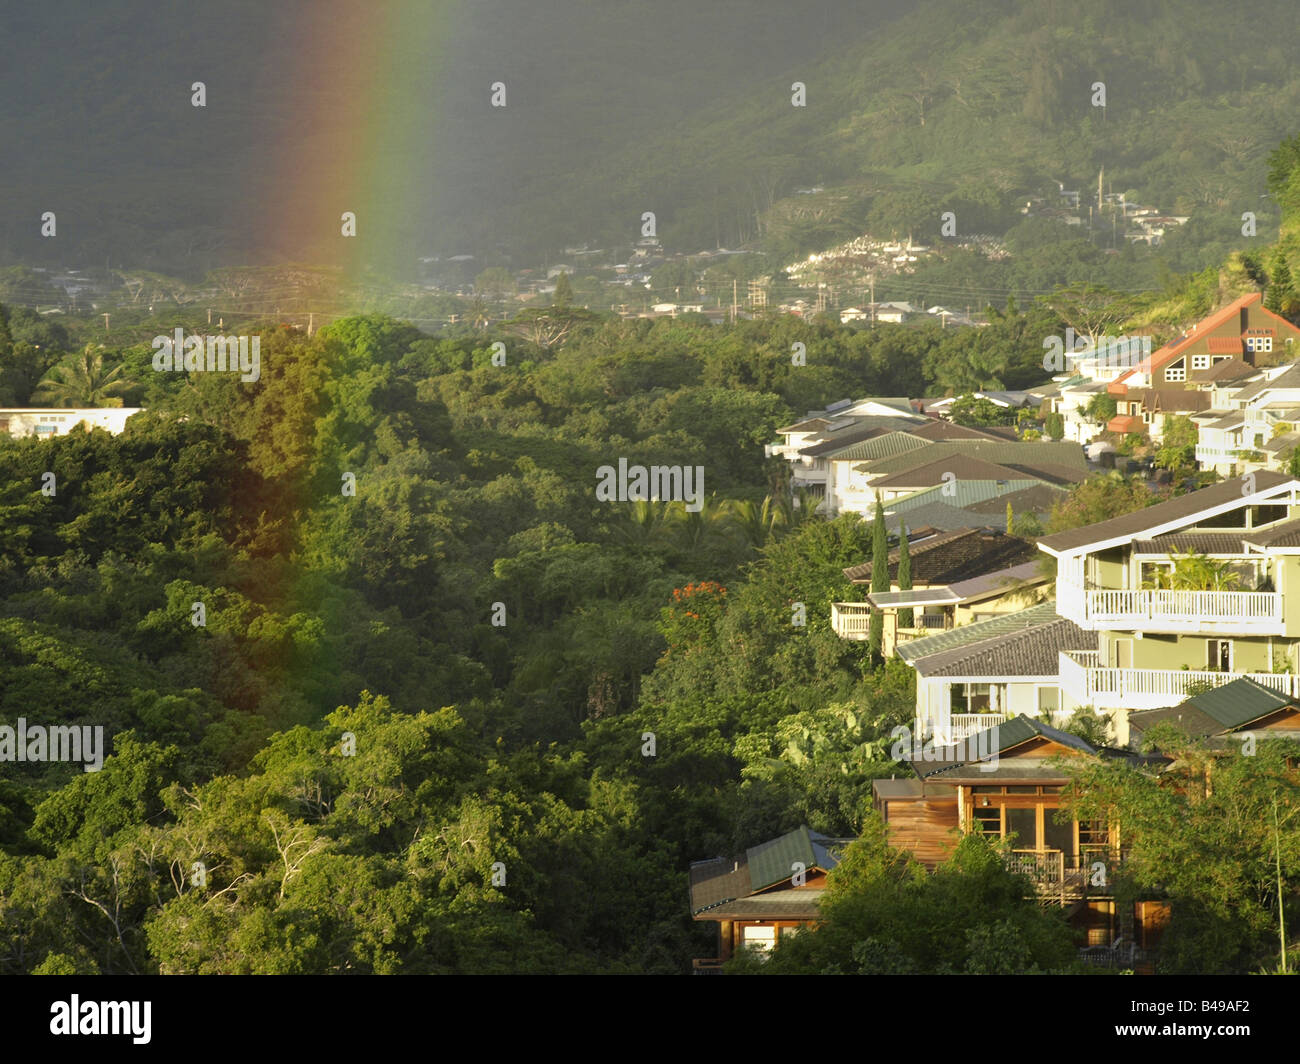 Rainbow in Manoa Valley, continuing in the foreground (Oahu, Hawaii) Stock Photo